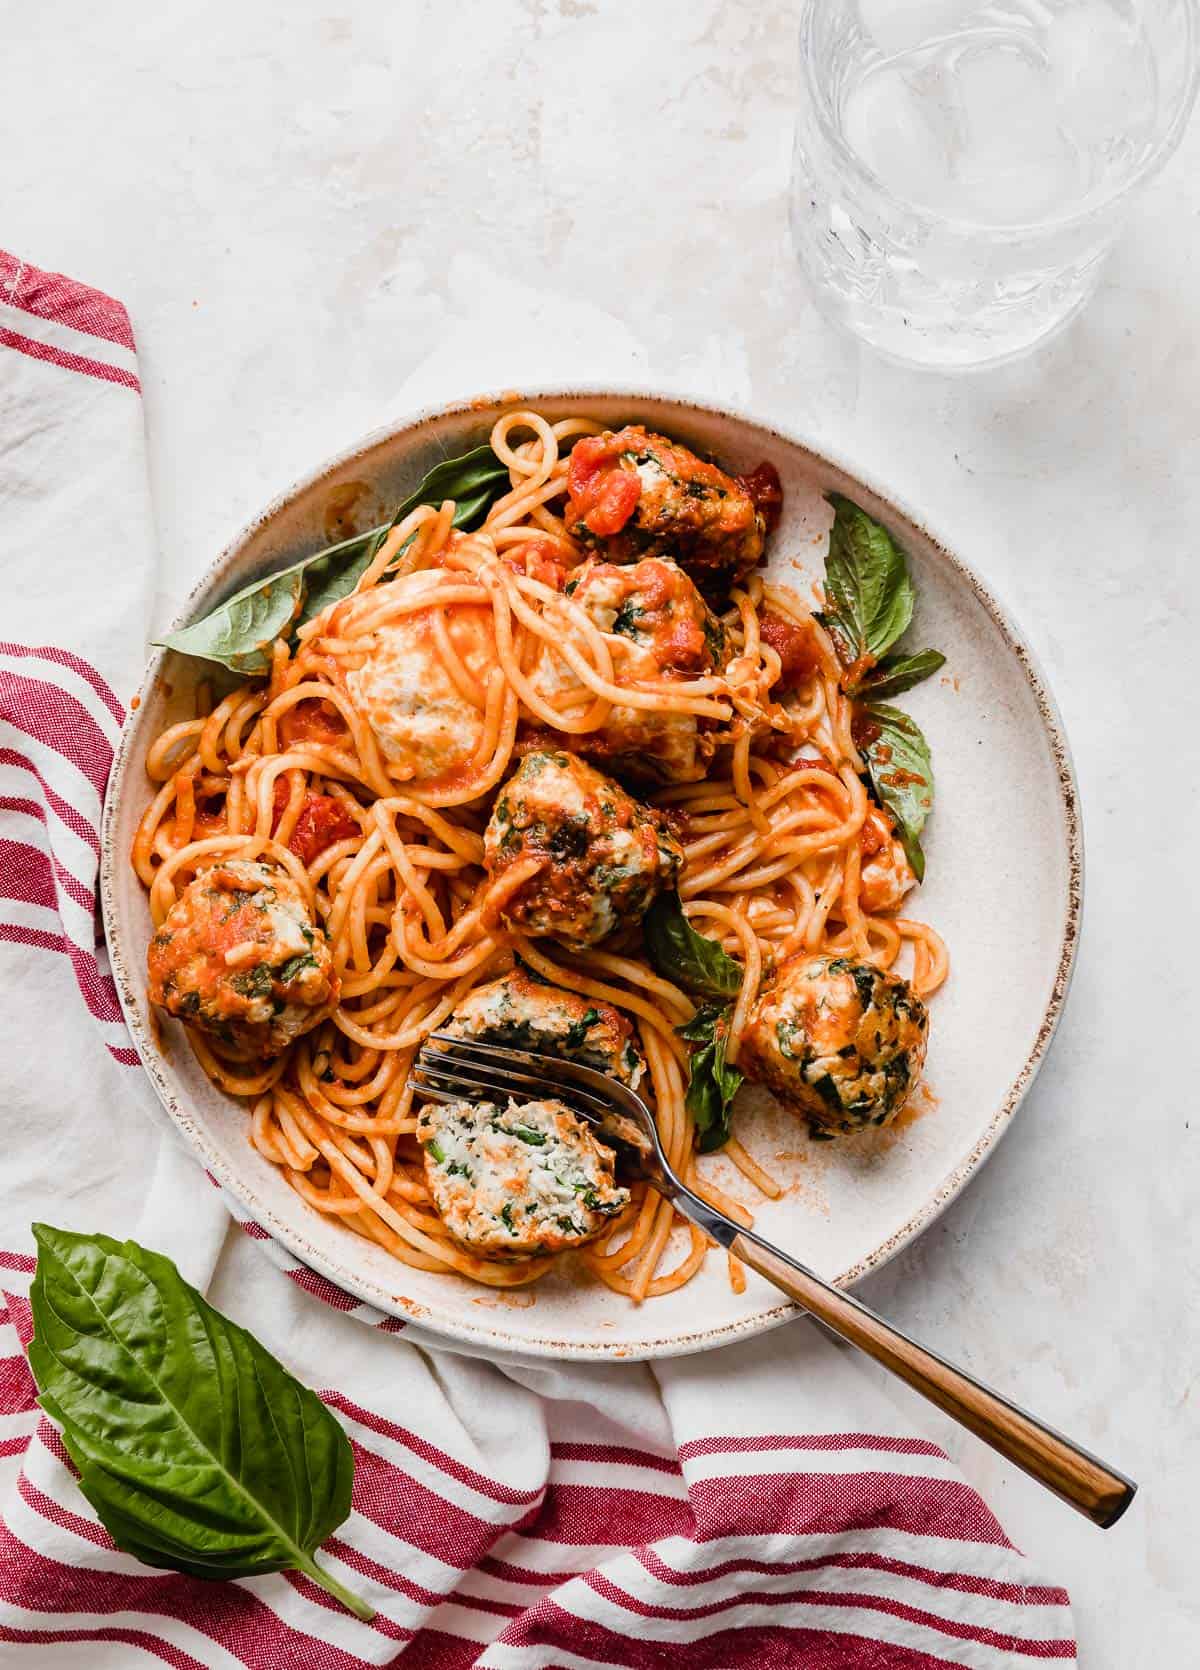 Turkey Spinach Meatballs and Spaghetti on a white plate with a red striped towel to the left side of the plate.